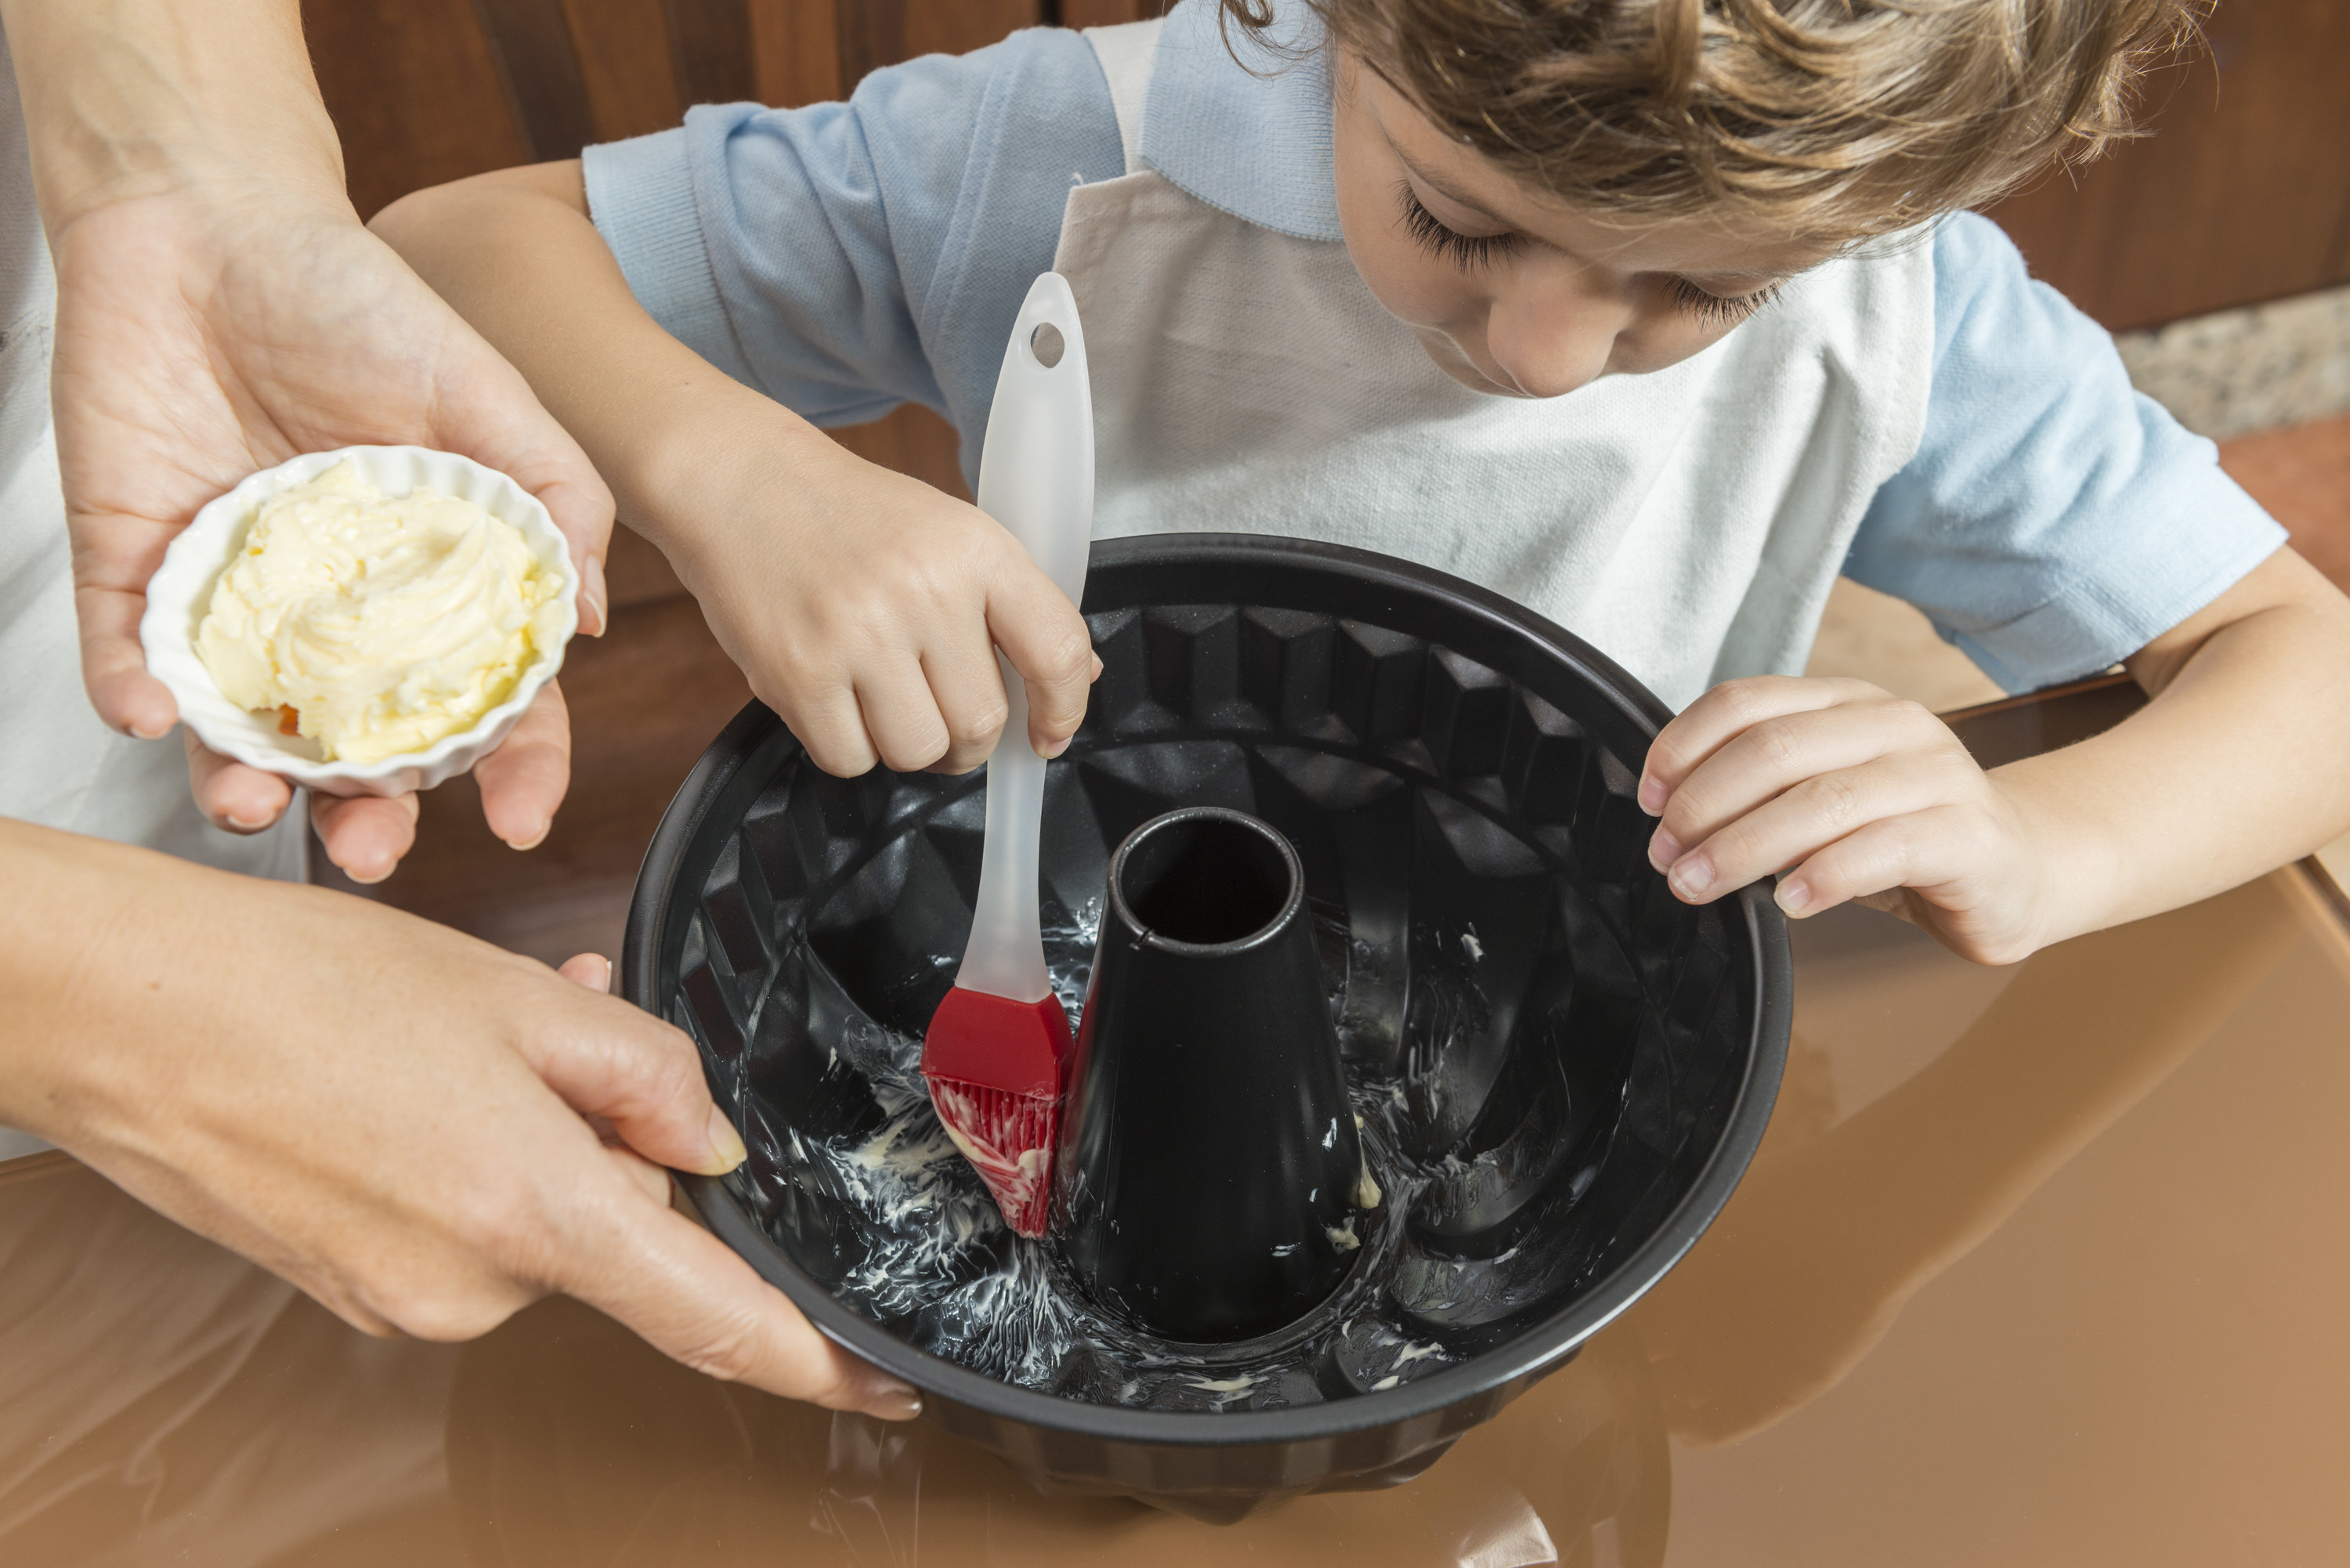 Child spreading butter at the bottom of a bundt cake pan